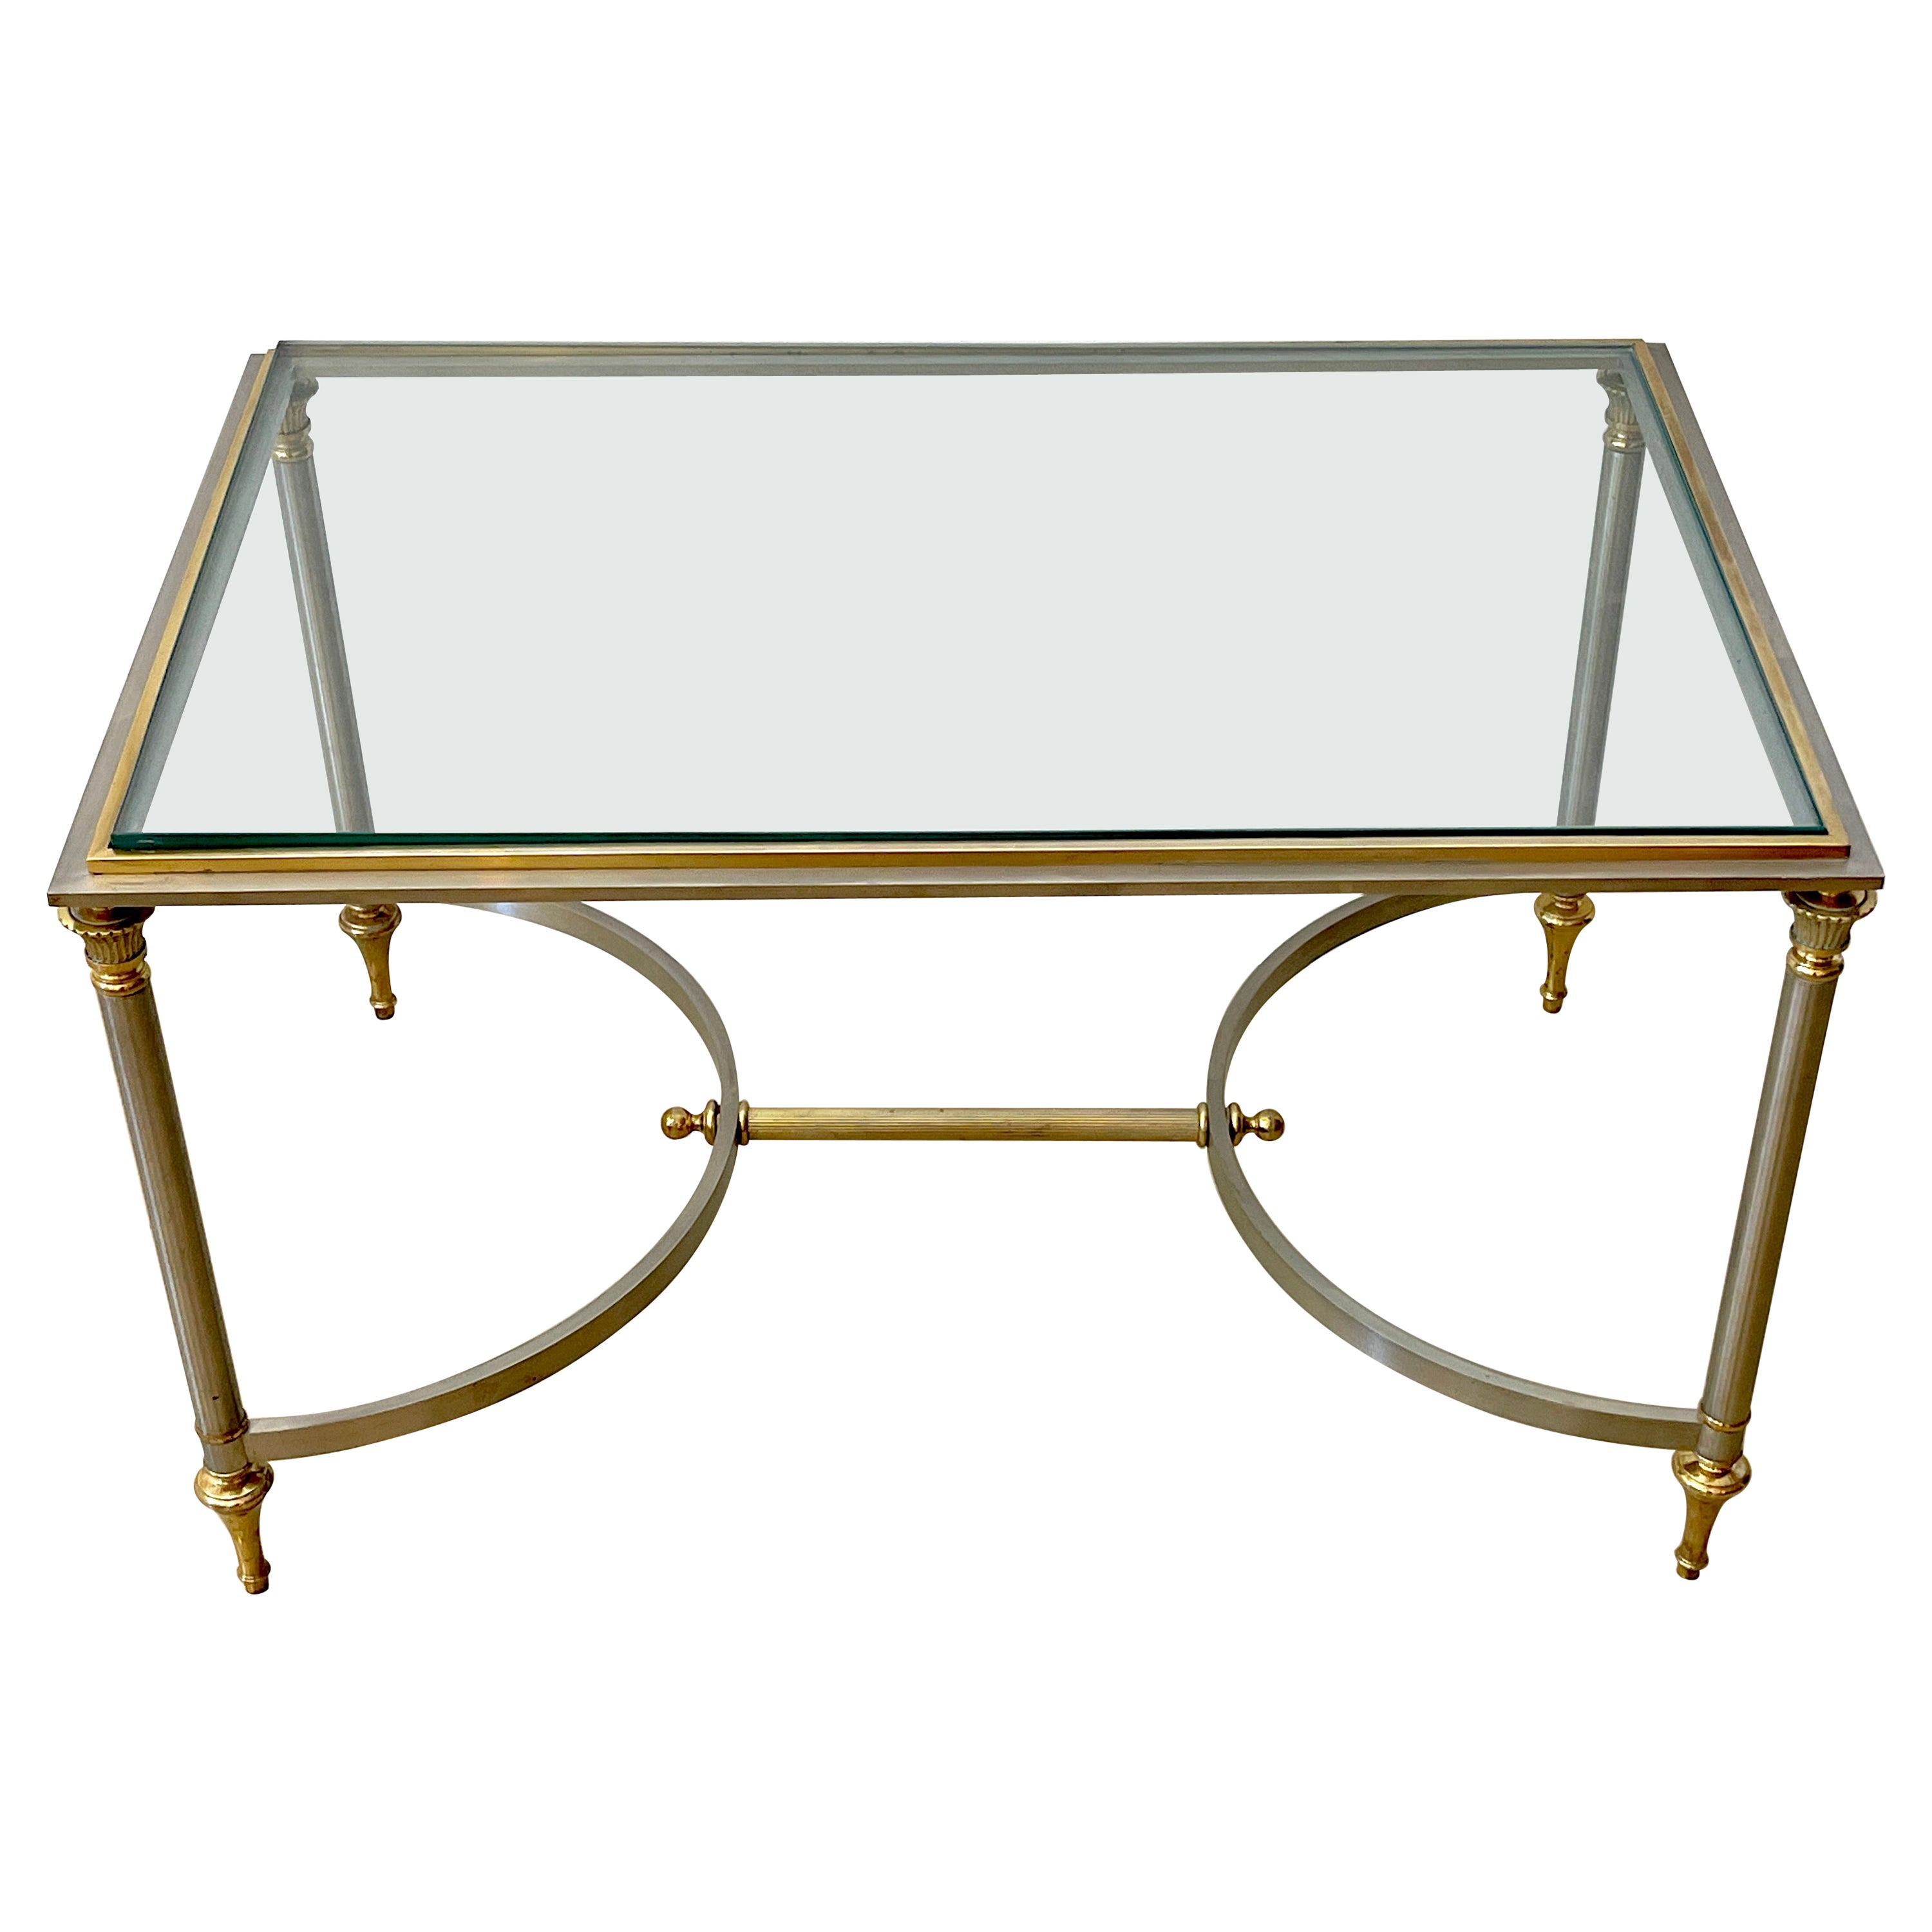 French Neoclassical Steel & Gilt Bronze Coffee Table, Style of Maison Jansen